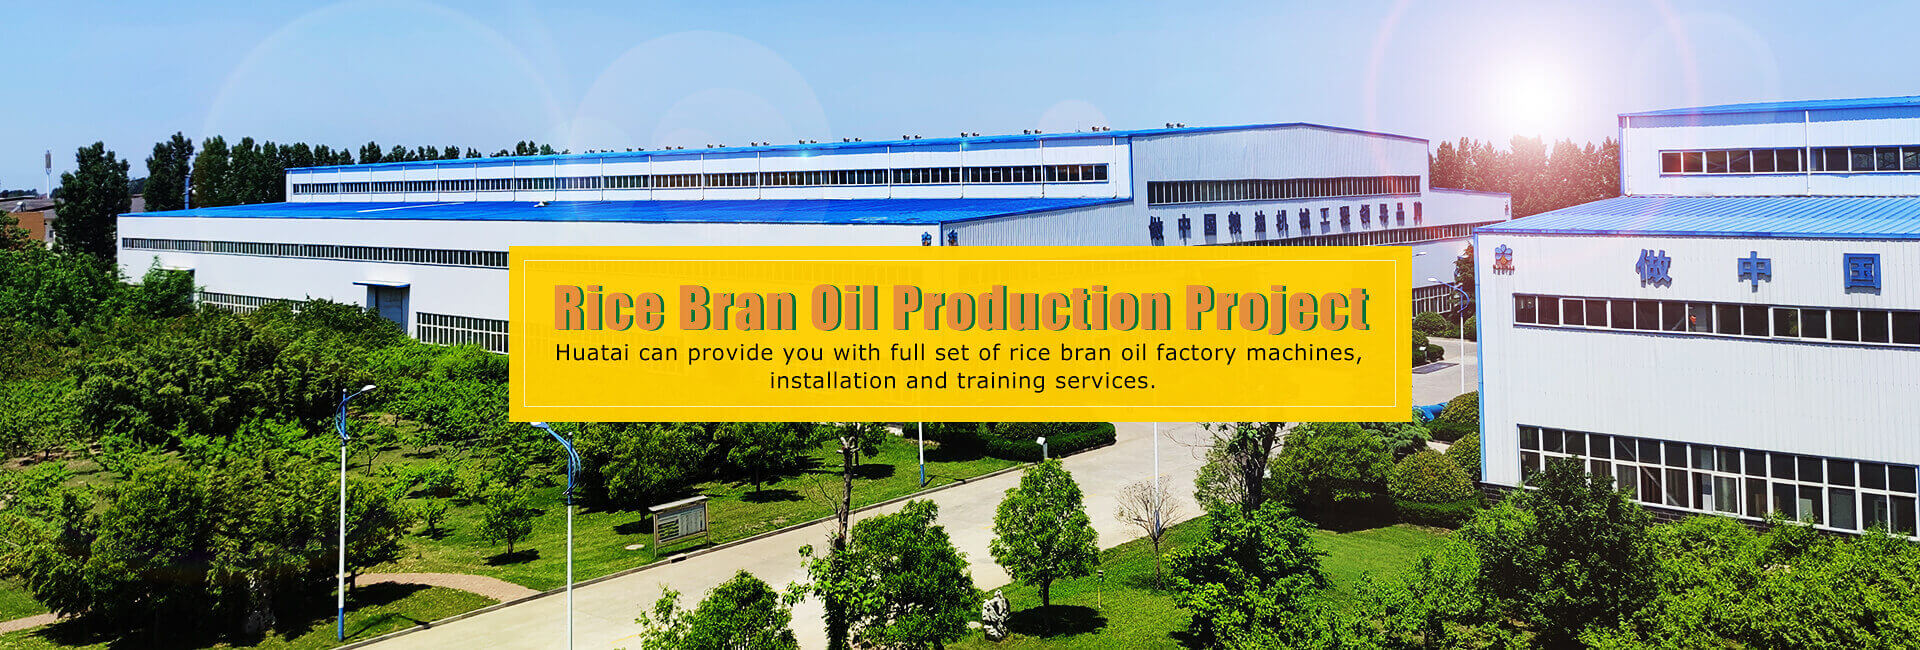 Rice Bran Oil Production Project